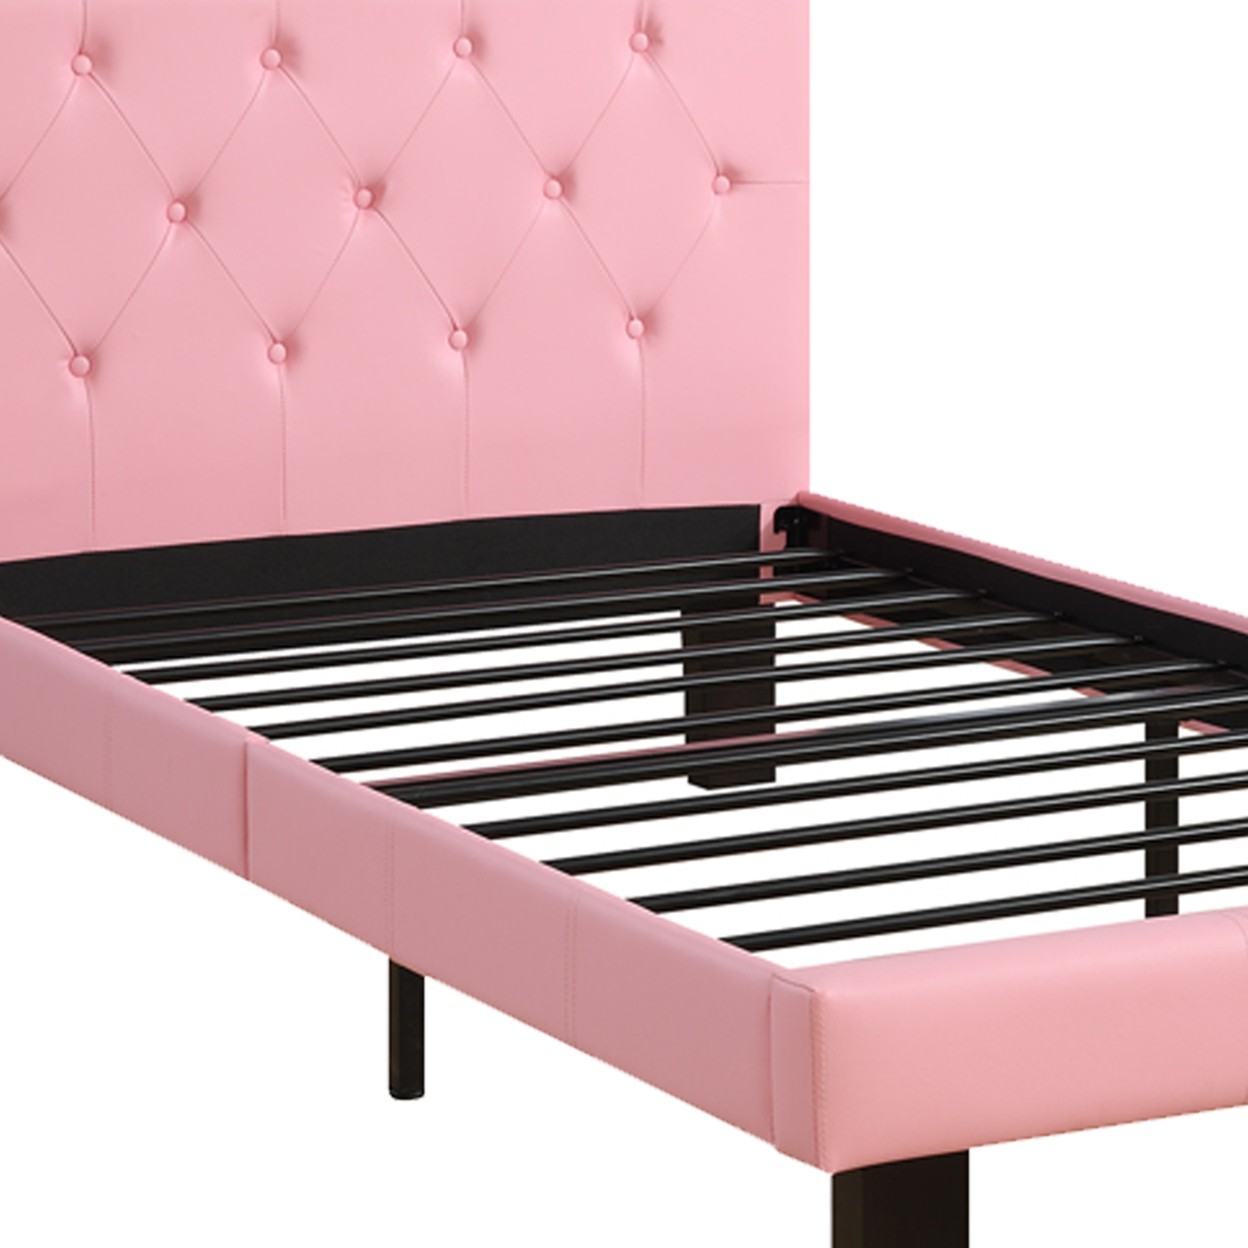 Faux Leather Upholstered Twin Size Bed With Tufted Headboard Pink- Saltoro Sherpi